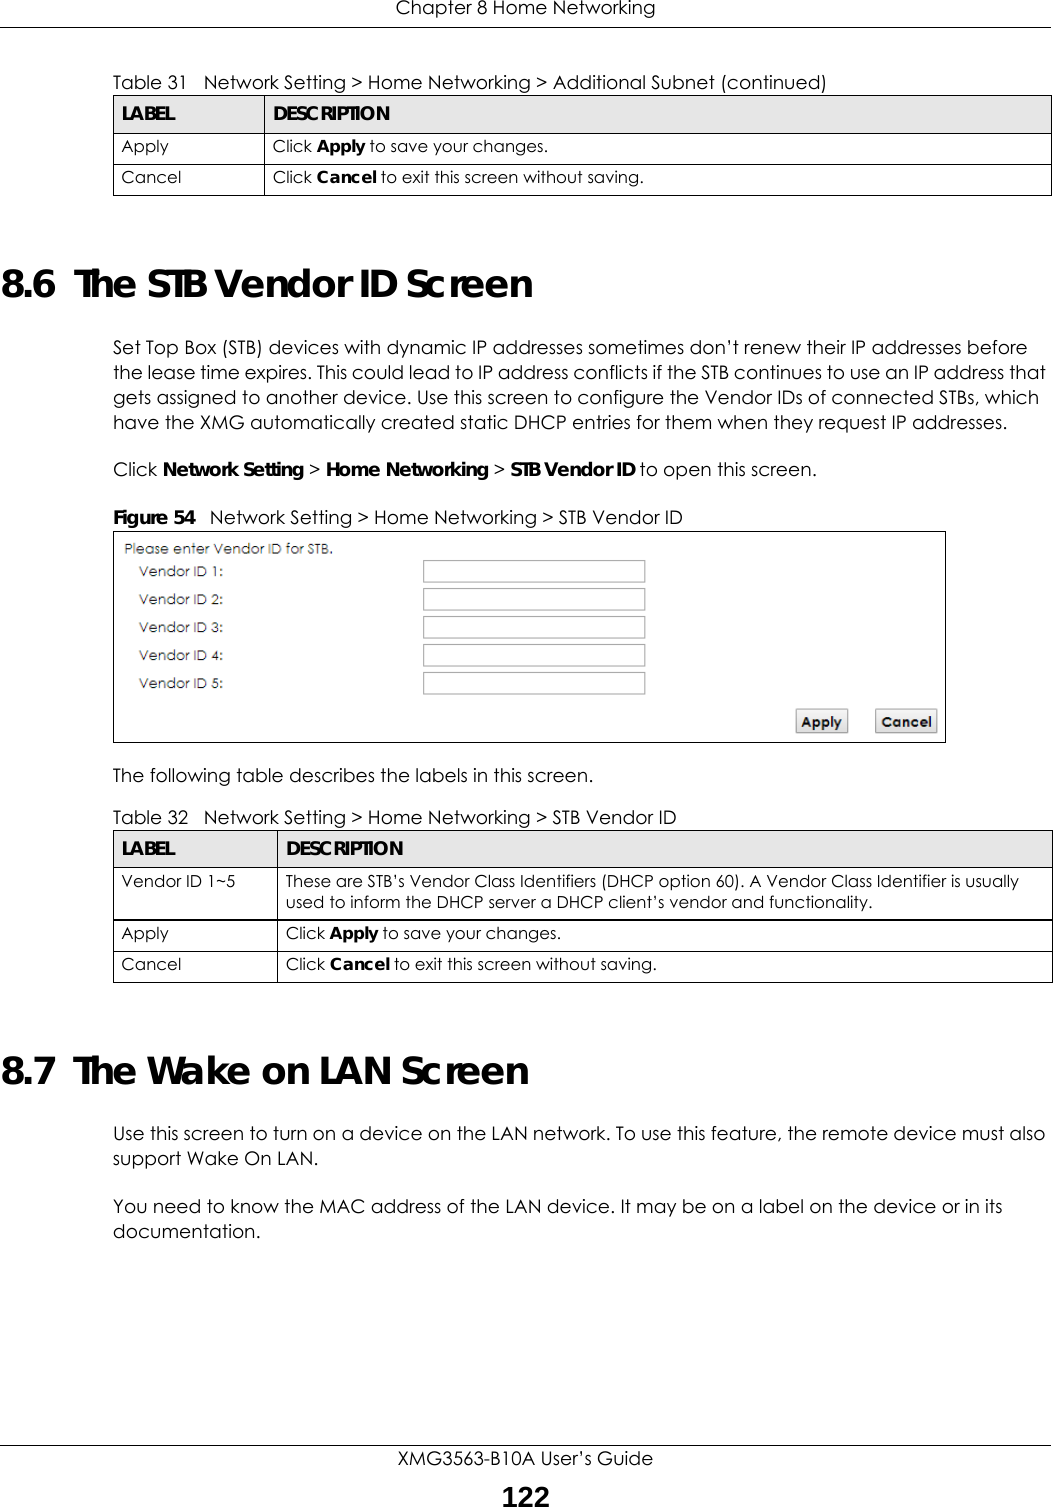 Chapter 8 Home NetworkingXMG3563-B10A User’s Guide1228.6  The STB Vendor ID ScreenSet Top Box (STB) devices with dynamic IP addresses sometimes don’t renew their IP addresses before the lease time expires. This could lead to IP address conflicts if the STB continues to use an IP address that gets assigned to another device. Use this screen to configure the Vendor IDs of connected STBs, which have the XMG automatically created static DHCP entries for them when they request IP addresses.Click Network Setting &gt; Home Networking &gt; STB Vendor ID to open this screen. Figure 54   Network Setting &gt; Home Networking &gt; STB Vendor IDThe following table describes the labels in this screen.8.7  The Wake on LAN ScreenUse this screen to turn on a device on the LAN network. To use this feature, the remote device must also support Wake On LAN.You need to know the MAC address of the LAN device. It may be on a label on the device or in its documentation.Apply Click Apply to save your changes.Cancel Click Cancel to exit this screen without saving.Table 31   Network Setting &gt; Home Networking &gt; Additional Subnet (continued)LABEL DESCRIPTIONTable 32   Network Setting &gt; Home Networking &gt; STB Vendor IDLABEL DESCRIPTIONVendor ID 1~5 These are STB’s Vendor Class Identifiers (DHCP option 60). A Vendor Class Identifier is usually used to inform the DHCP server a DHCP client’s vendor and functionality.Apply Click Apply to save your changes.Cancel Click Cancel to exit this screen without saving.